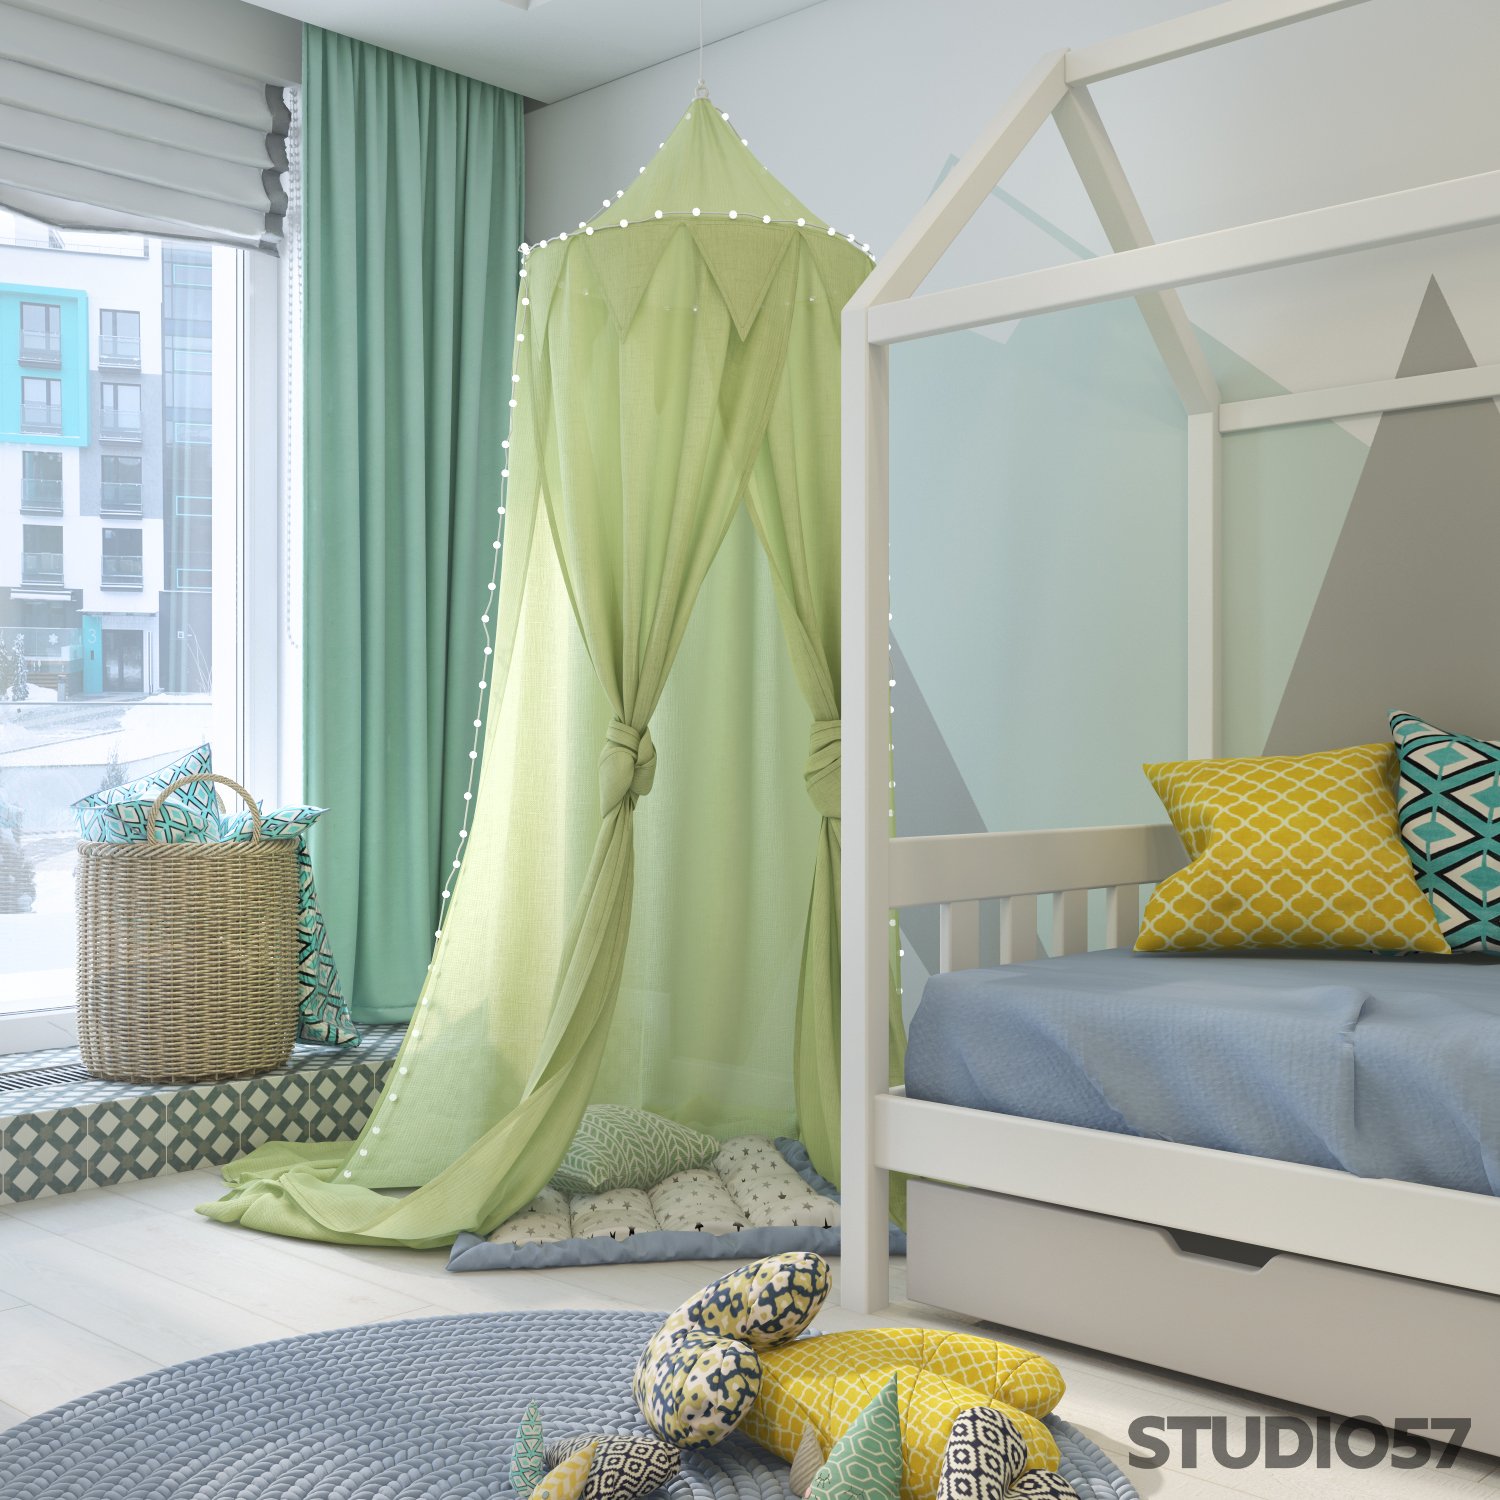 Design of a bed in a nursery photo